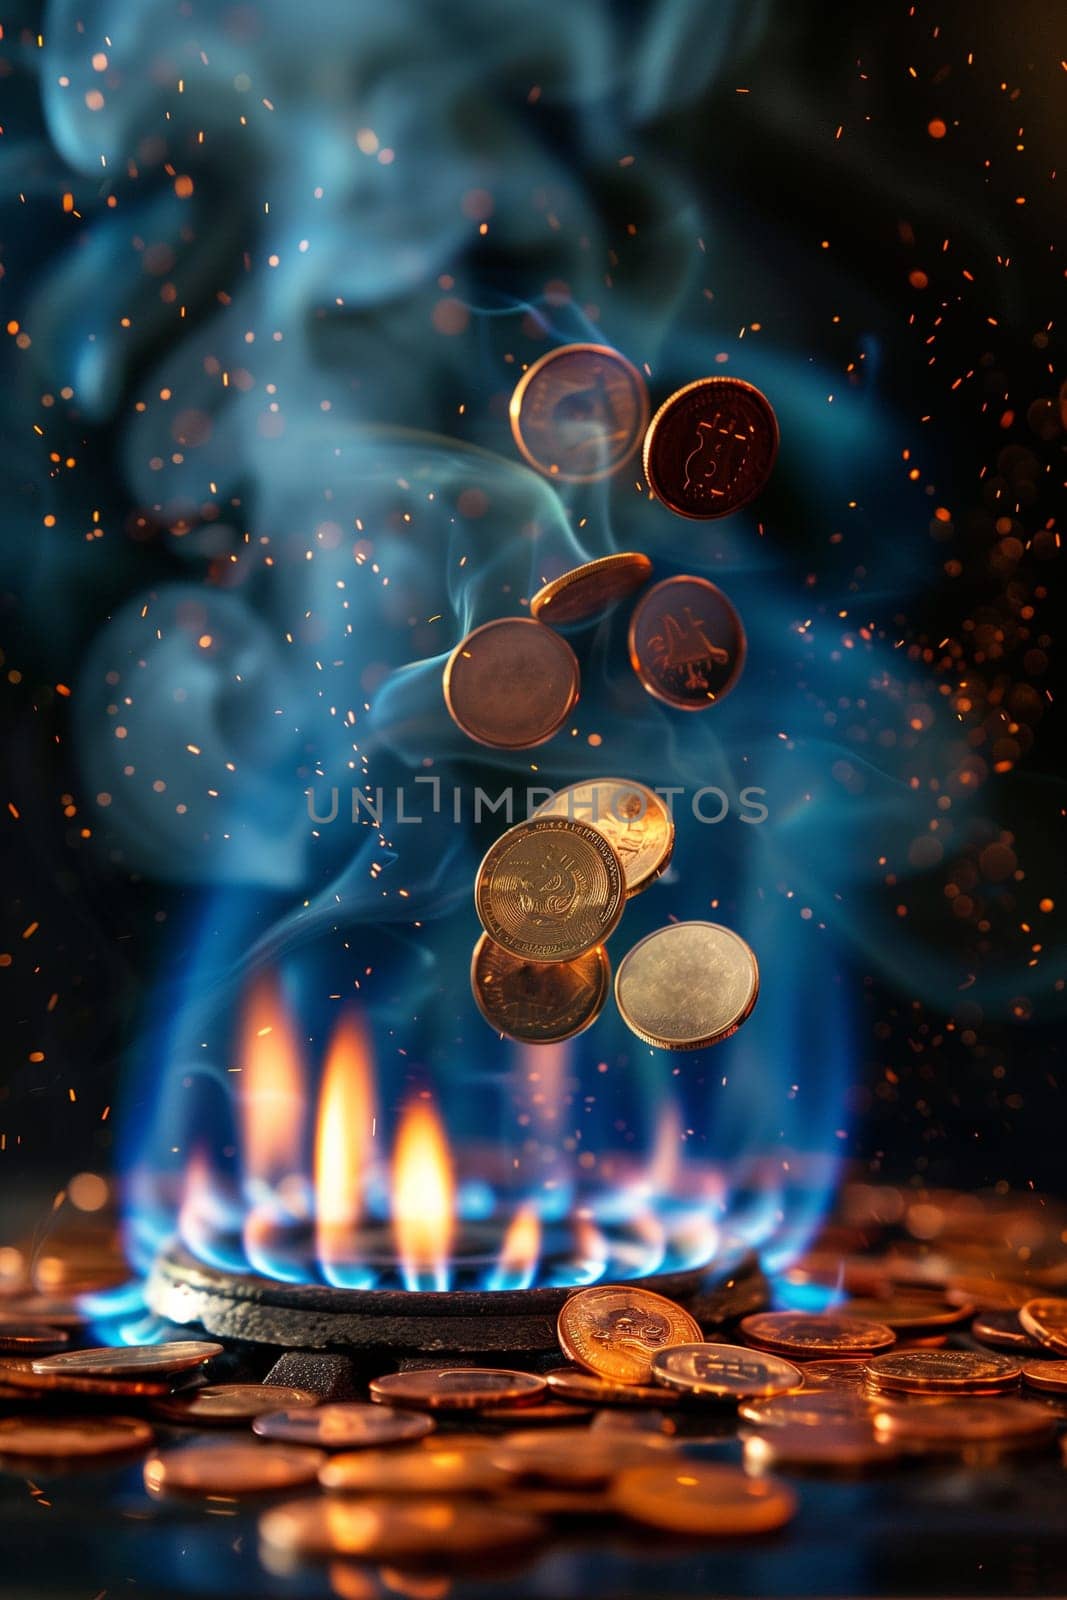 Close up view of a stove burner covered in a variety of coins, including pennies, nickels, dimes, and quarters.